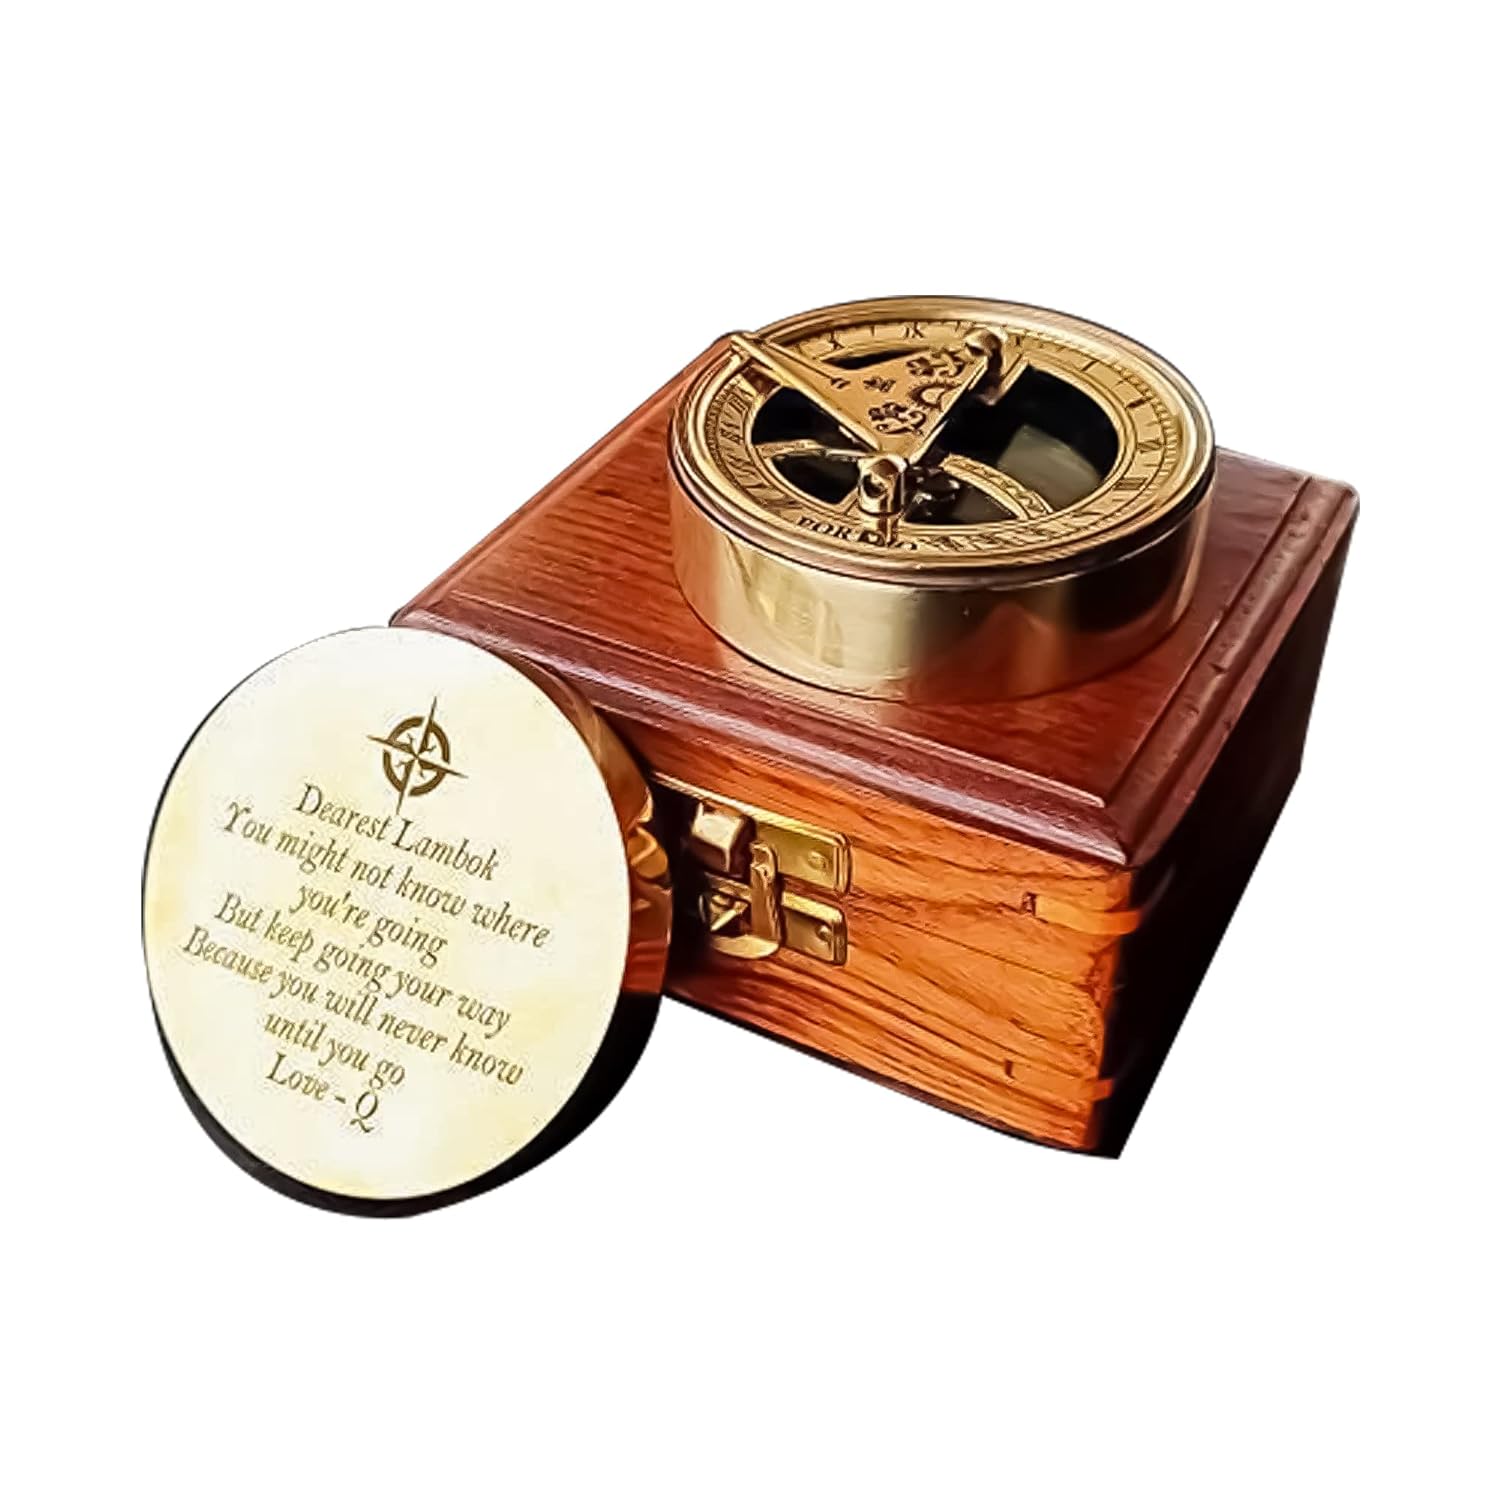 PORTHO Custom Sundial Compass with Wooden Box| Hiking Gift for Travel, Camping, Adventure, mom, Birthday| Gifts for Christmas, New Years